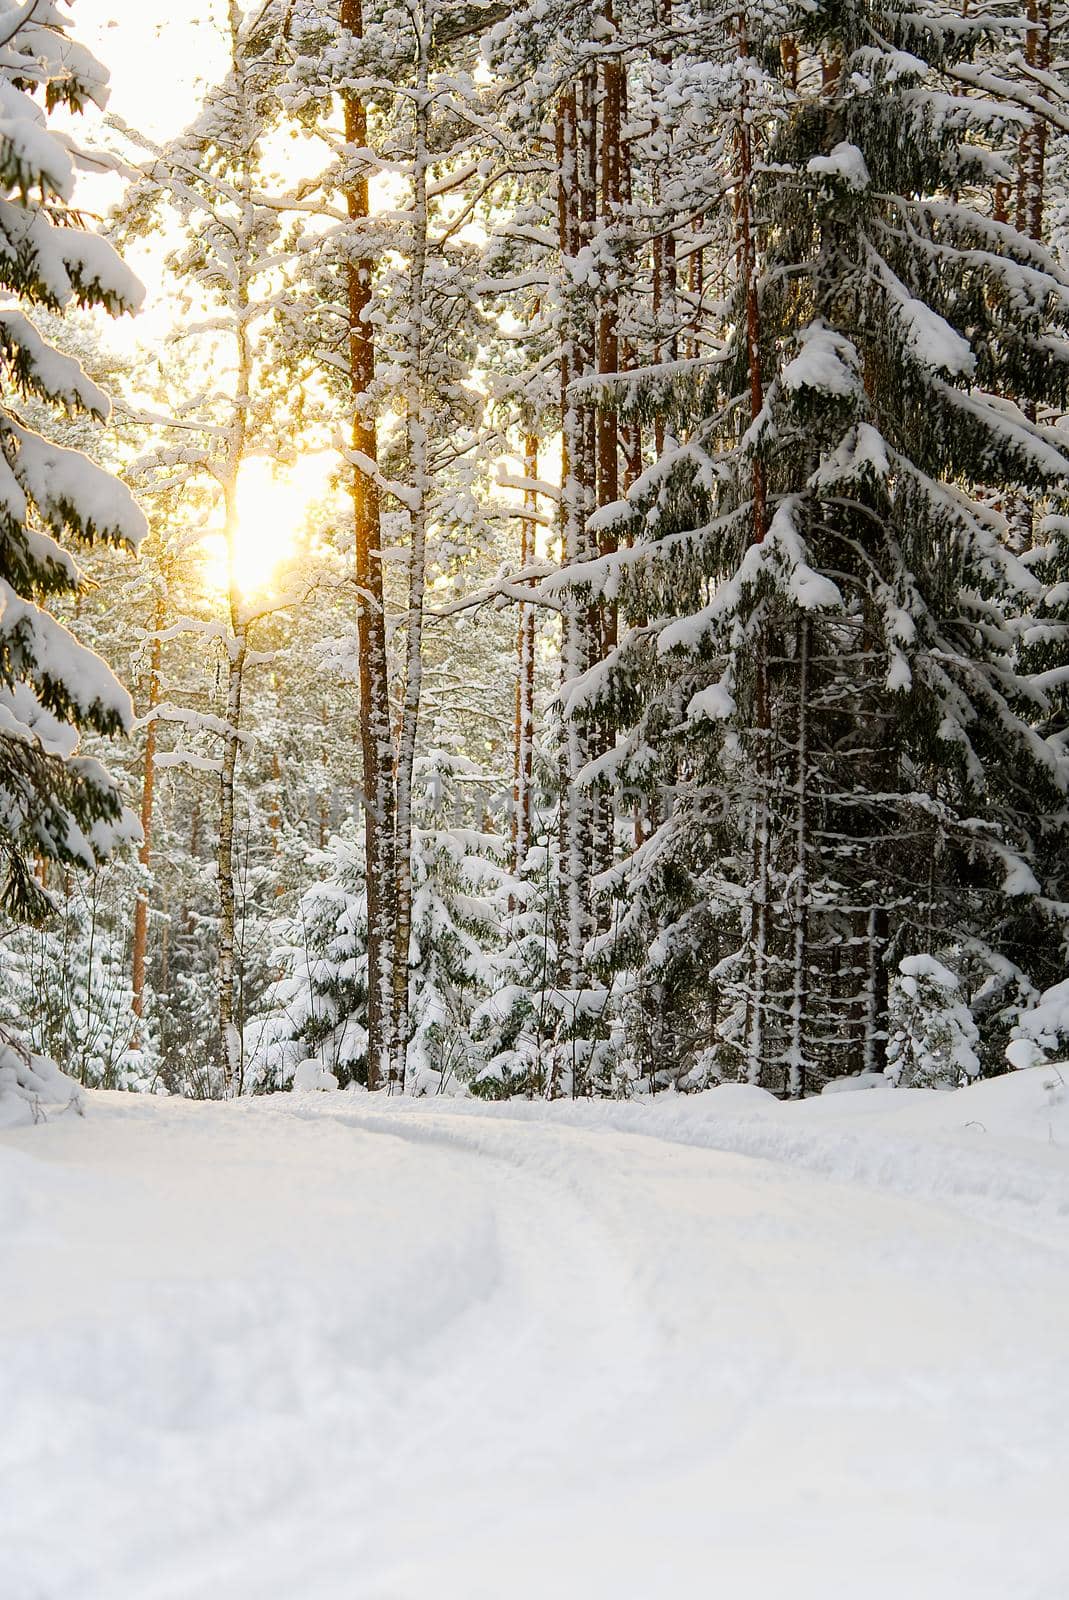 Winter scenery with pine forest covered with white snow. Selective focus. Winter landscape